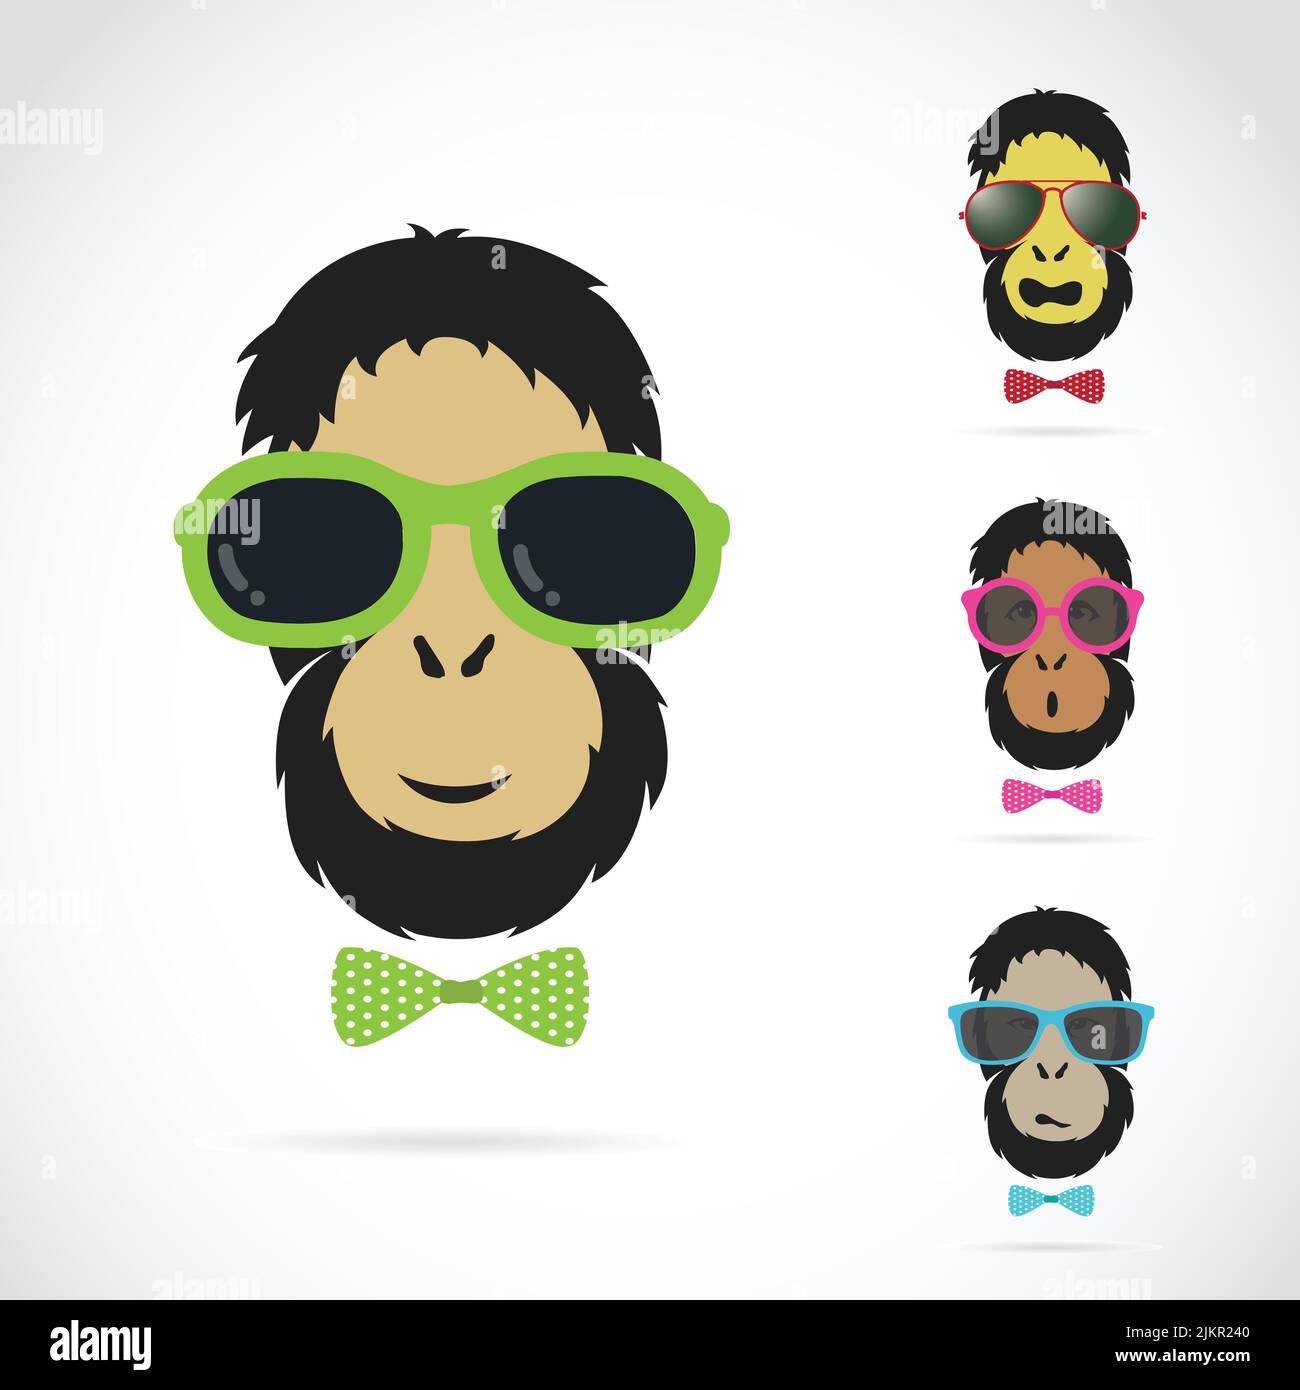 Vector images of orangutan wearing sunglasses on white background. Stock Vector